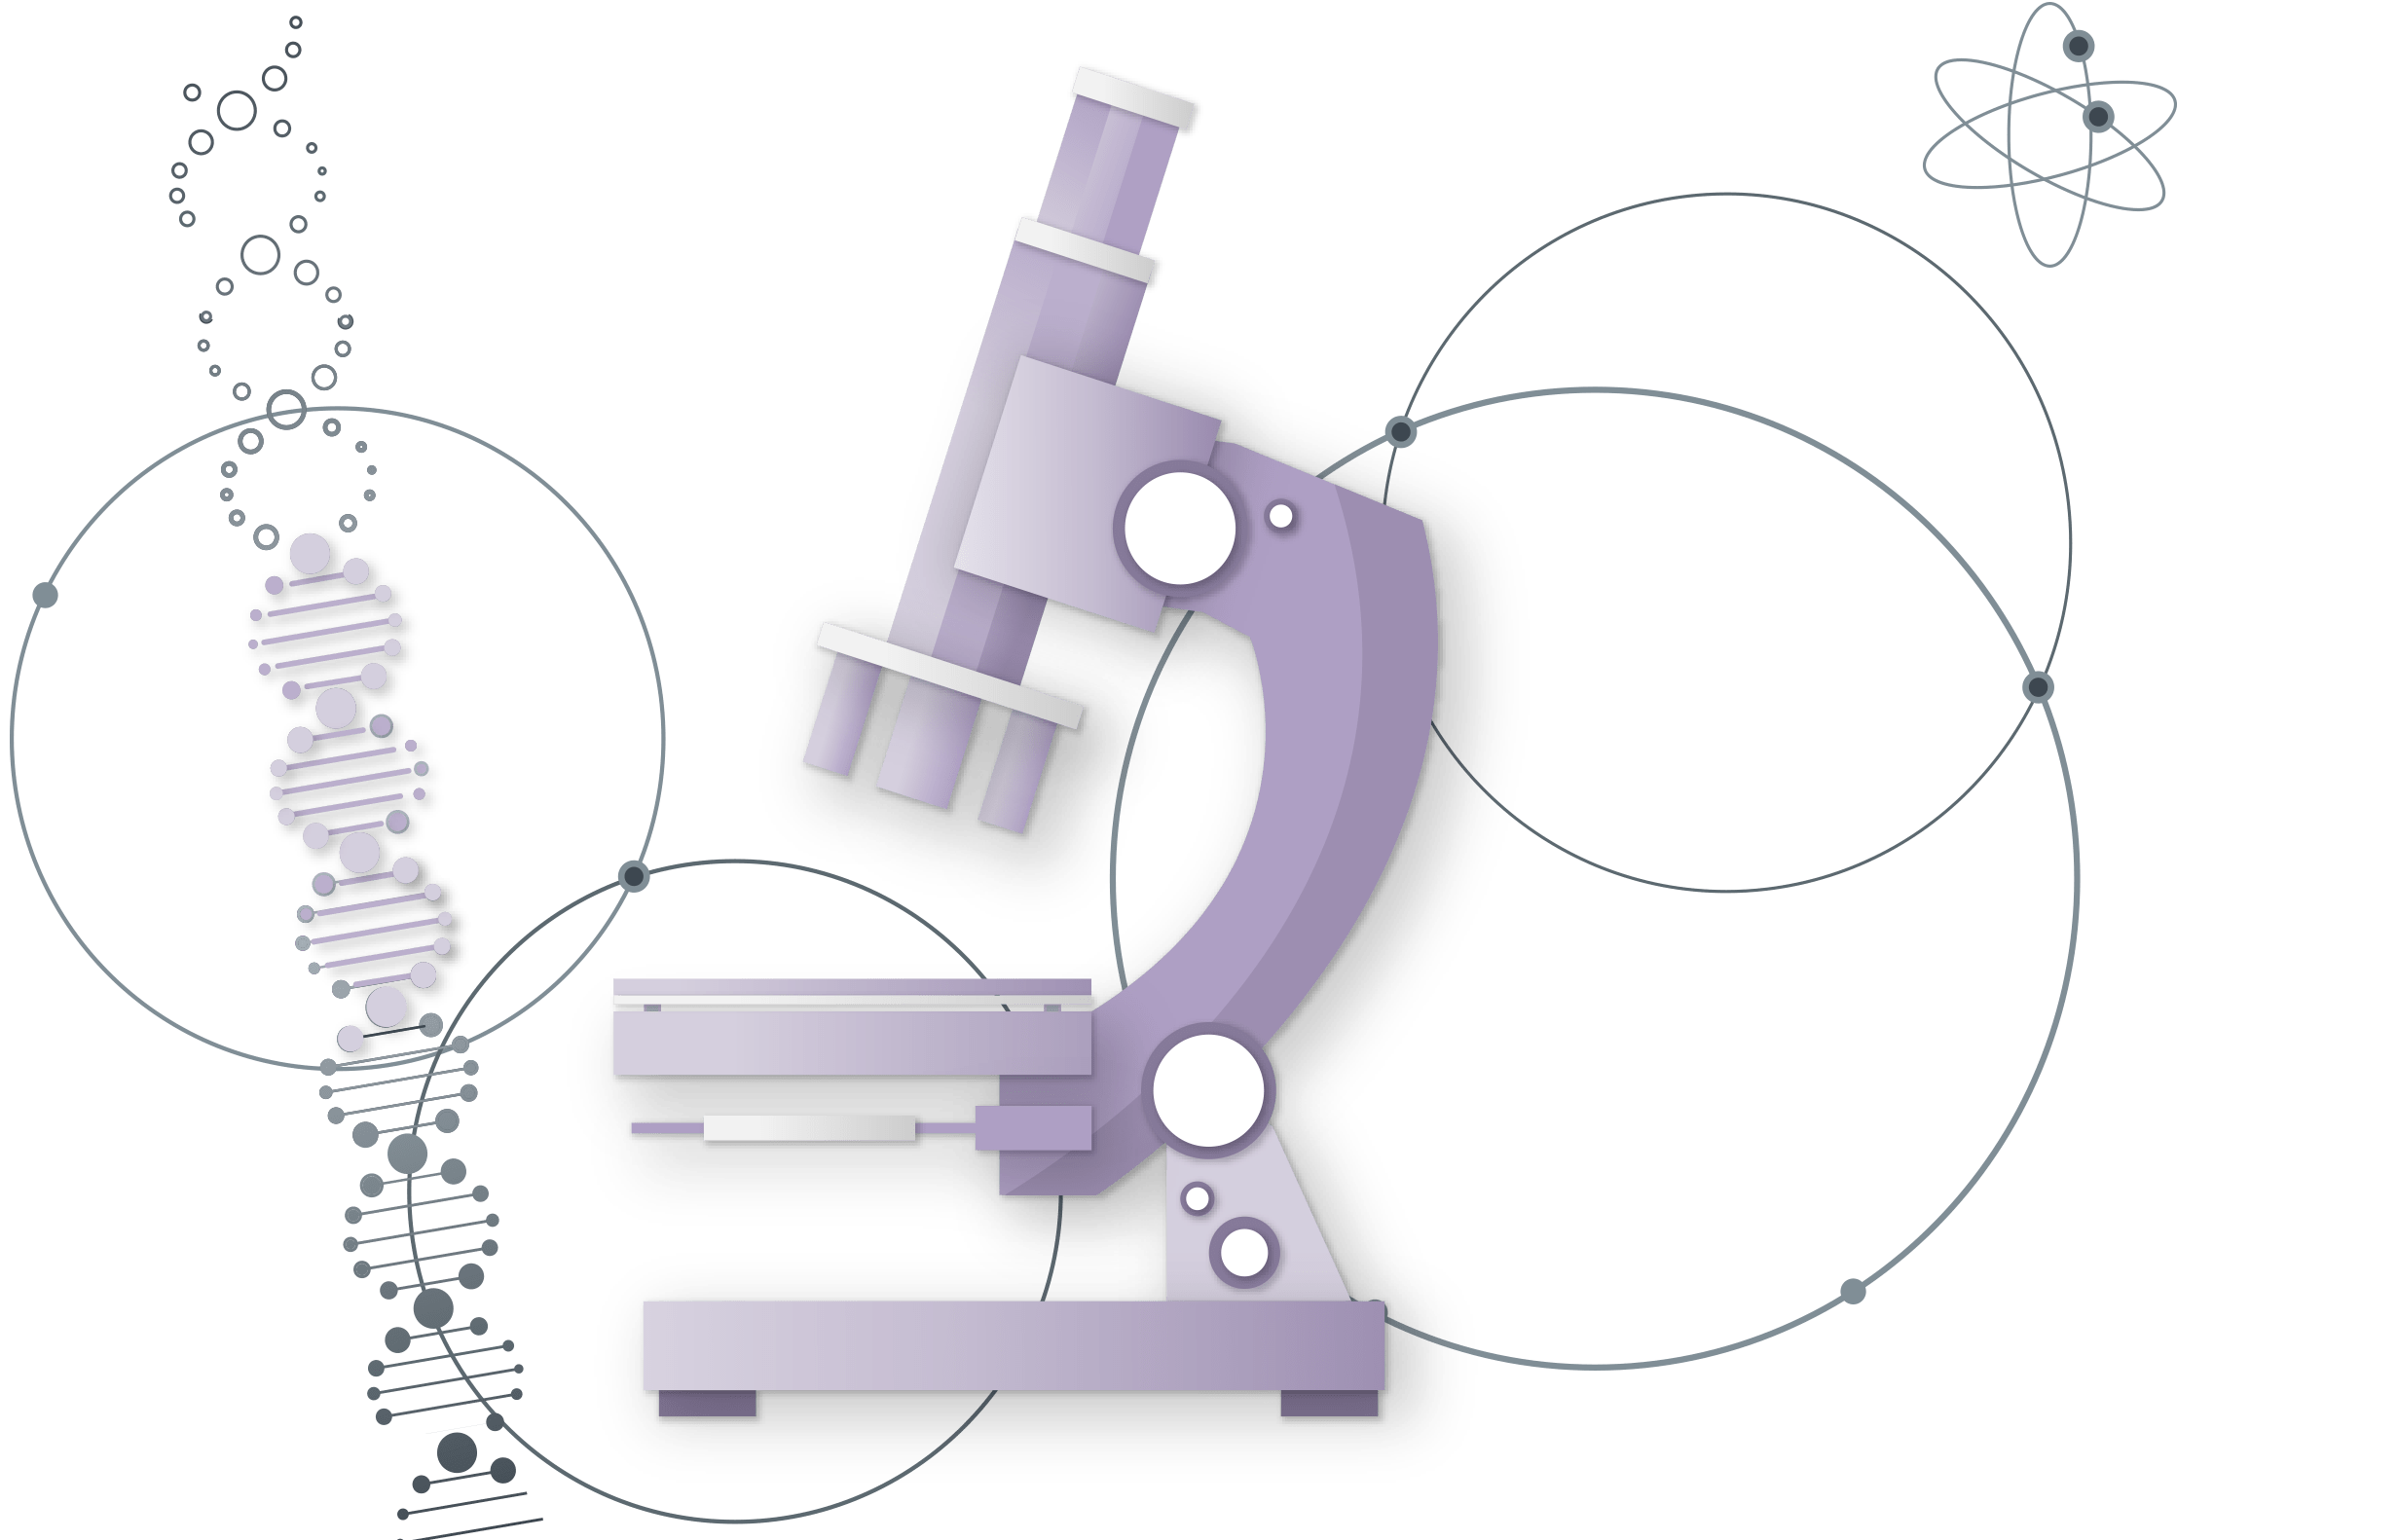 Medical and Scientific Icon showing a microscope and helix